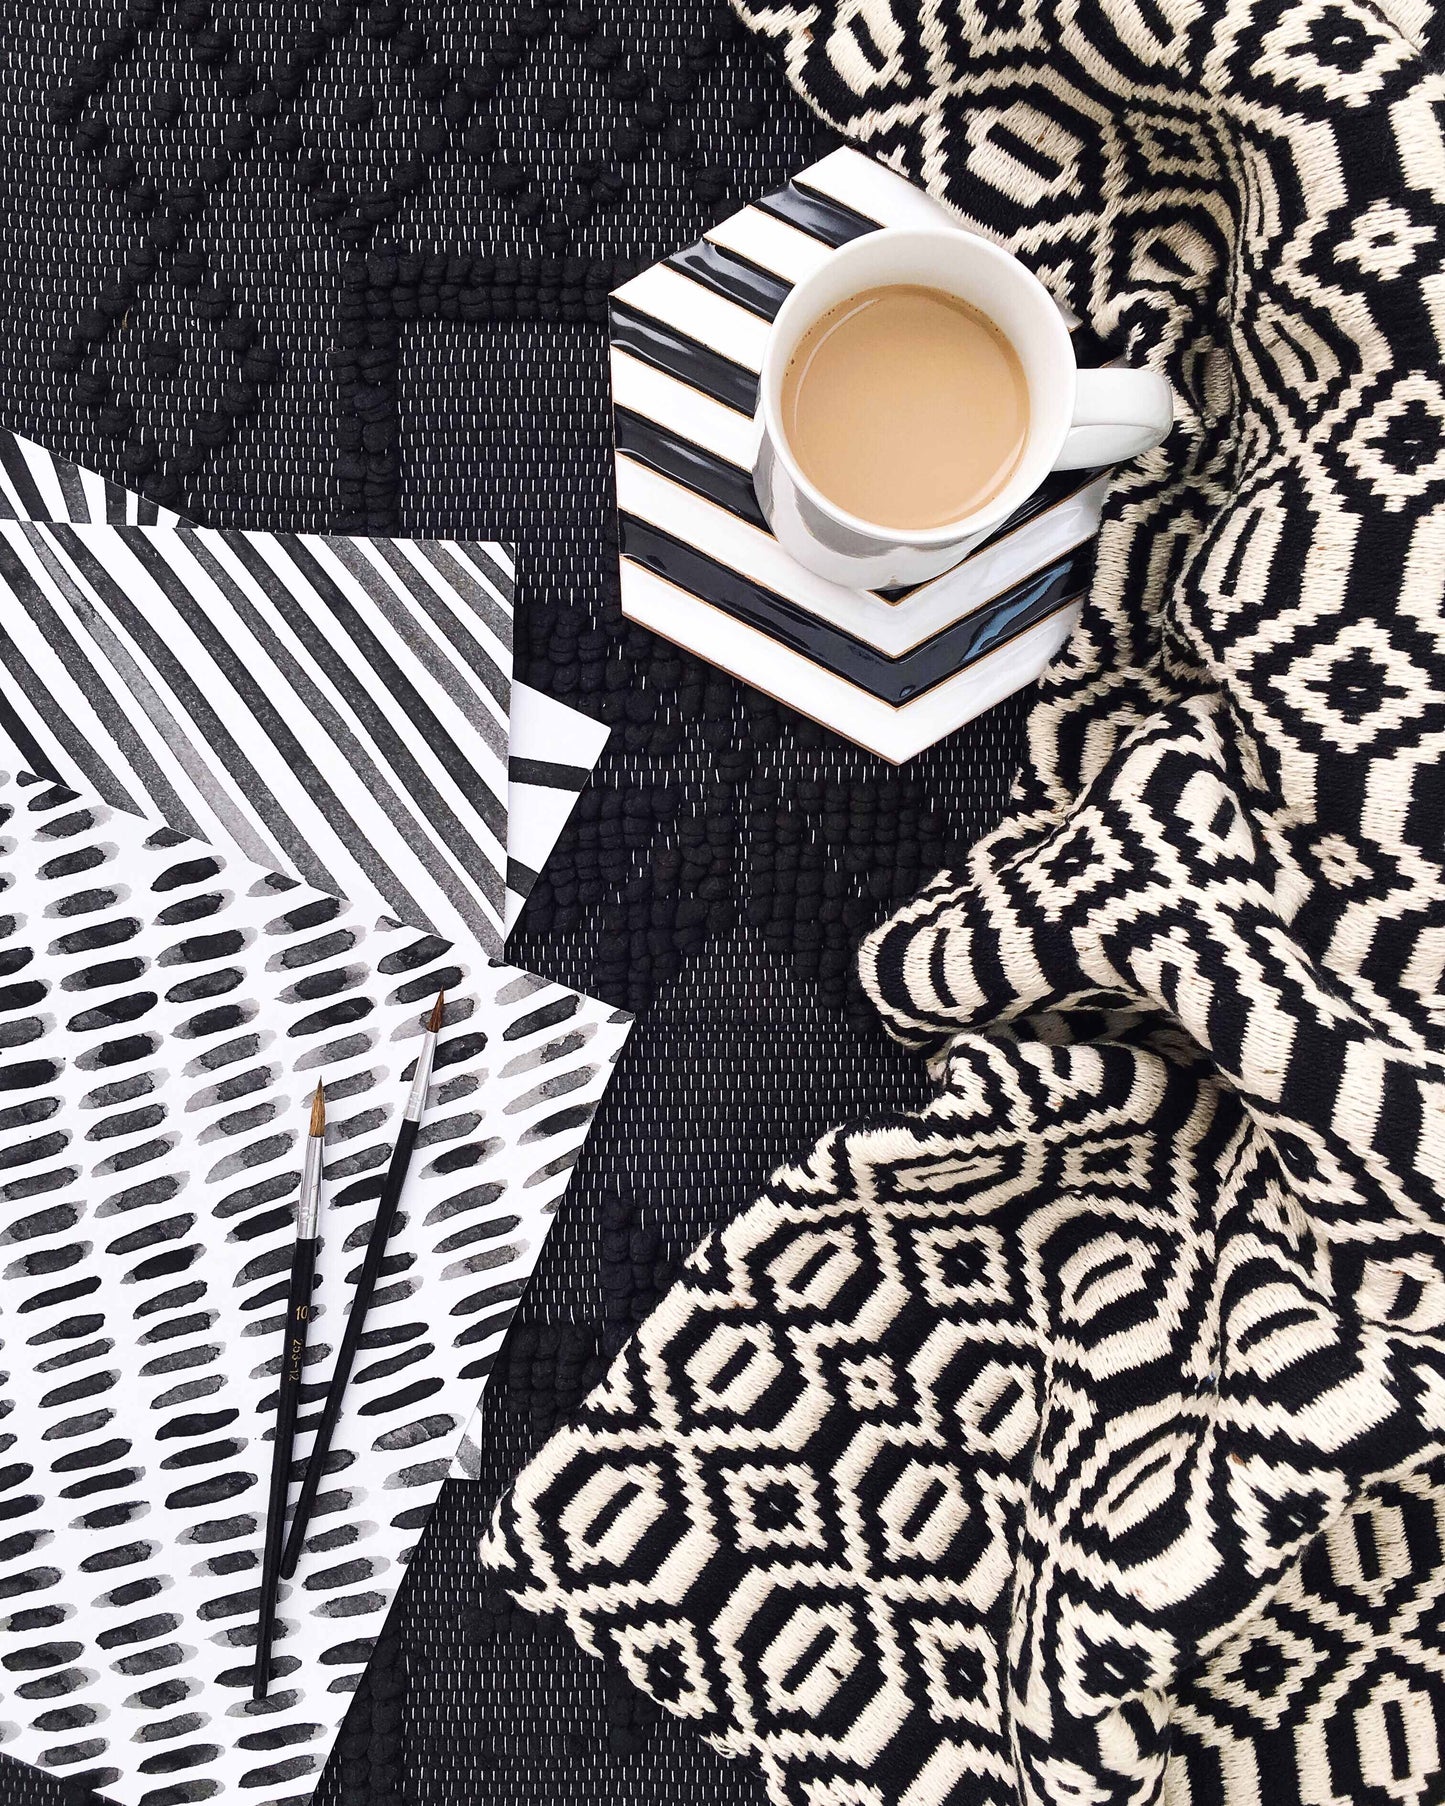 Handwoven recycled cotton blanket geometric pattern black and white B&W